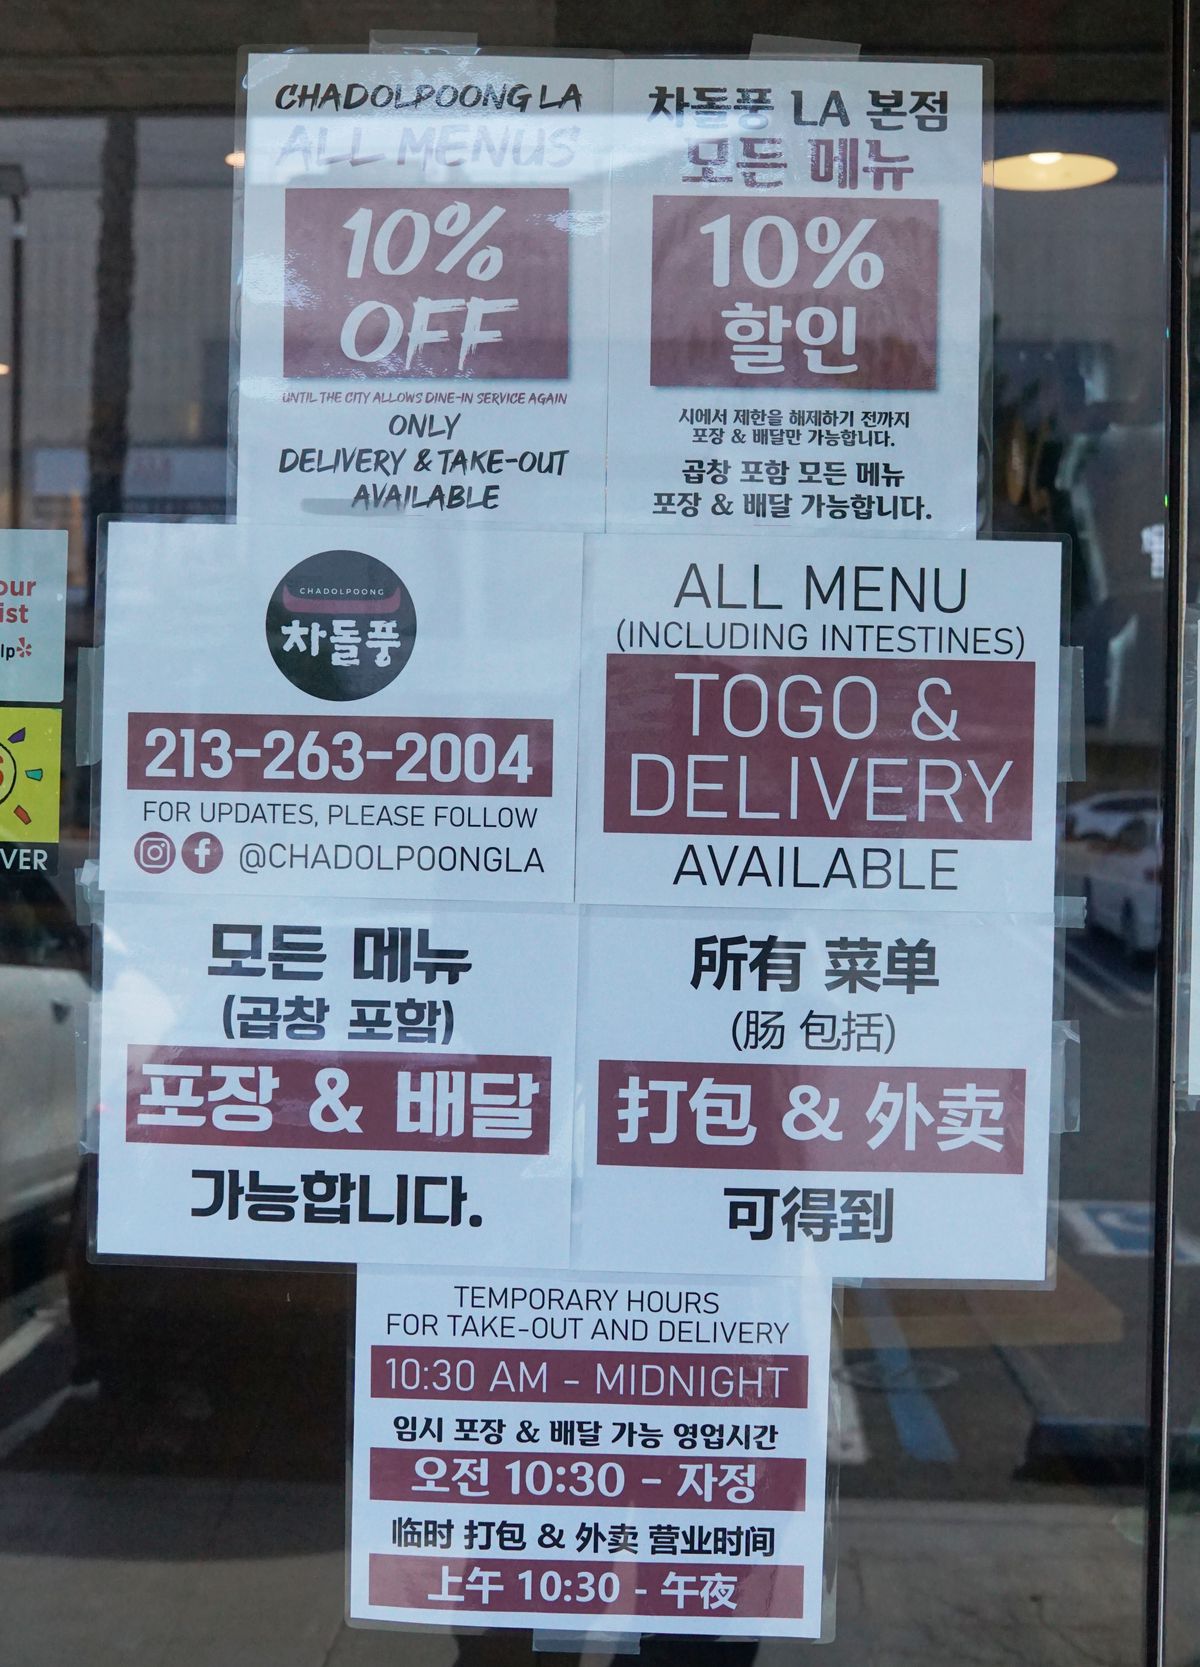 Takeout menu announcements in English and Korean in Koreatown, Los Angeles